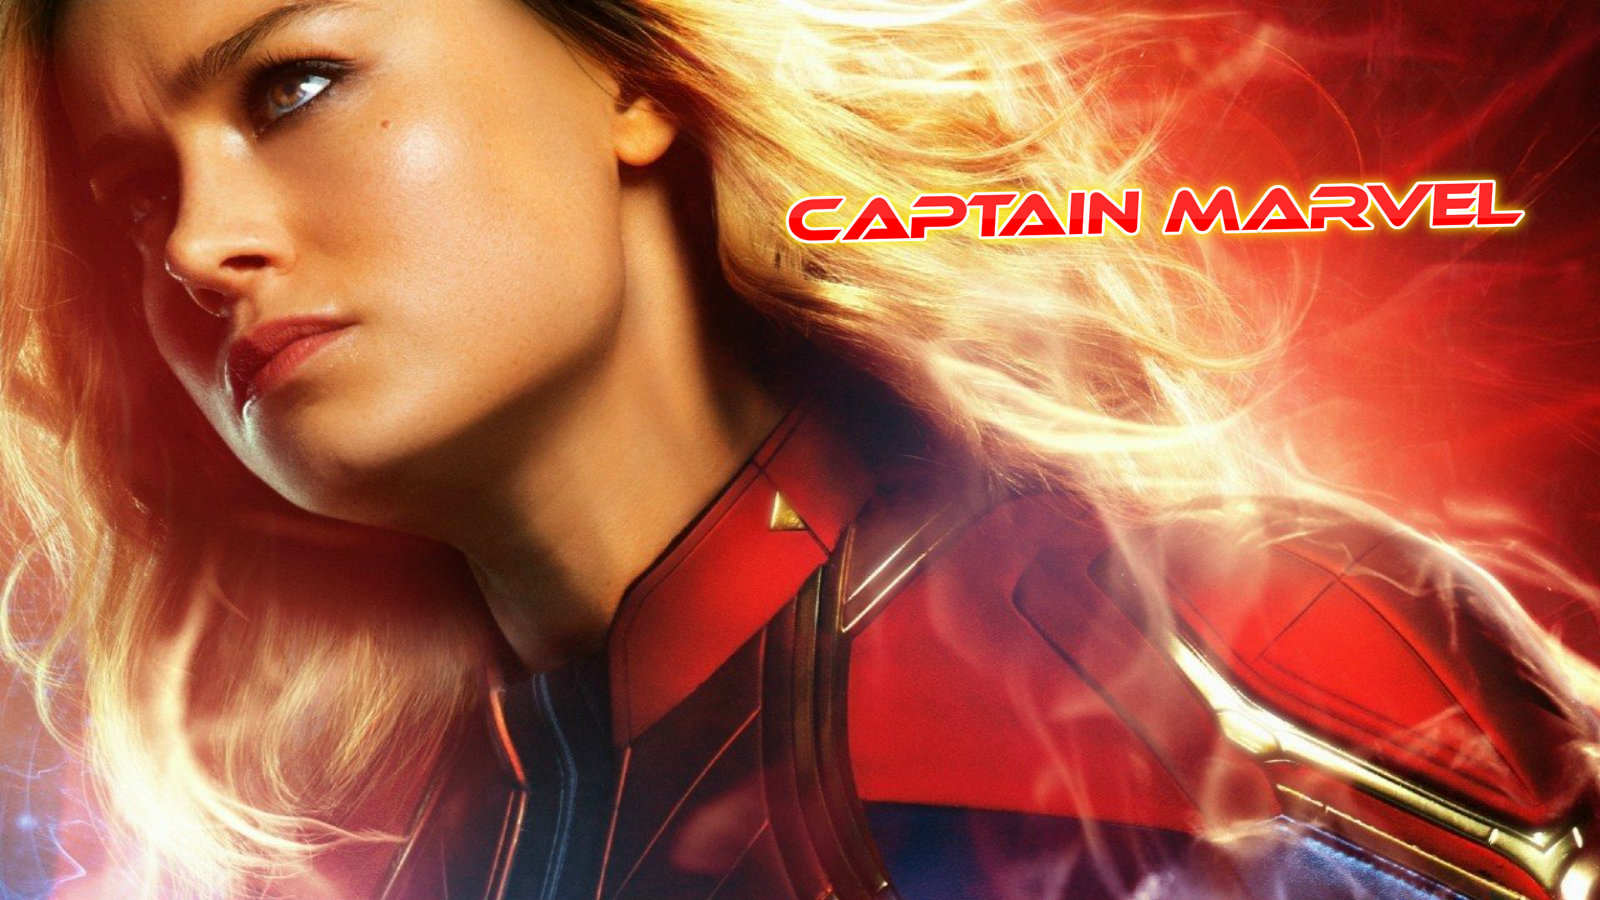 Captain Marvel download the new